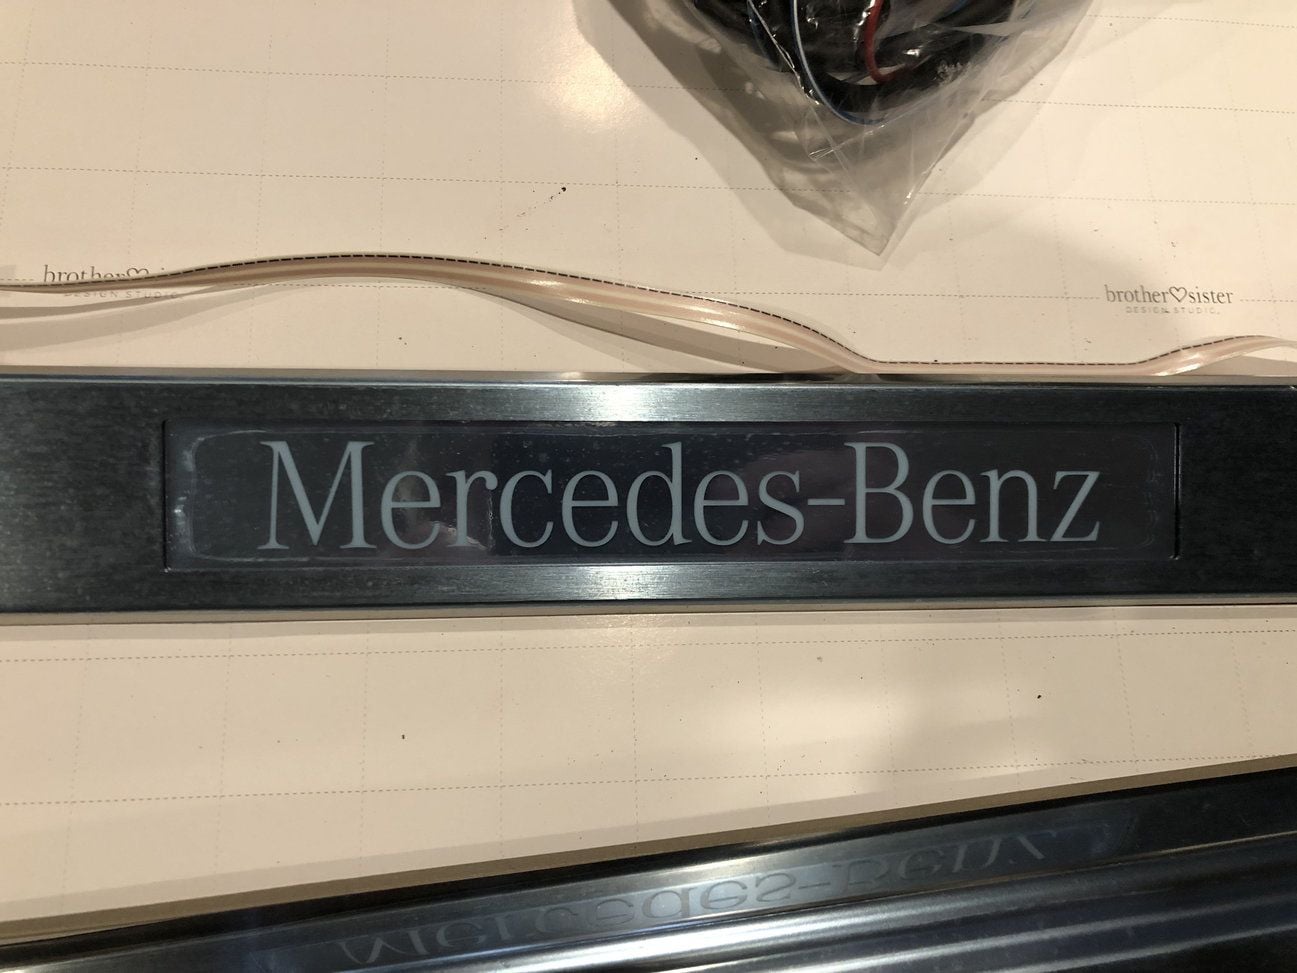 Interior/Upholstery - For Sale: OEM M-B Illuminated Door Sills CLS550 (C218) - New - 2012 to 2018 Mercedes-Benz CLS-Class - Houston, TX 77043, United States